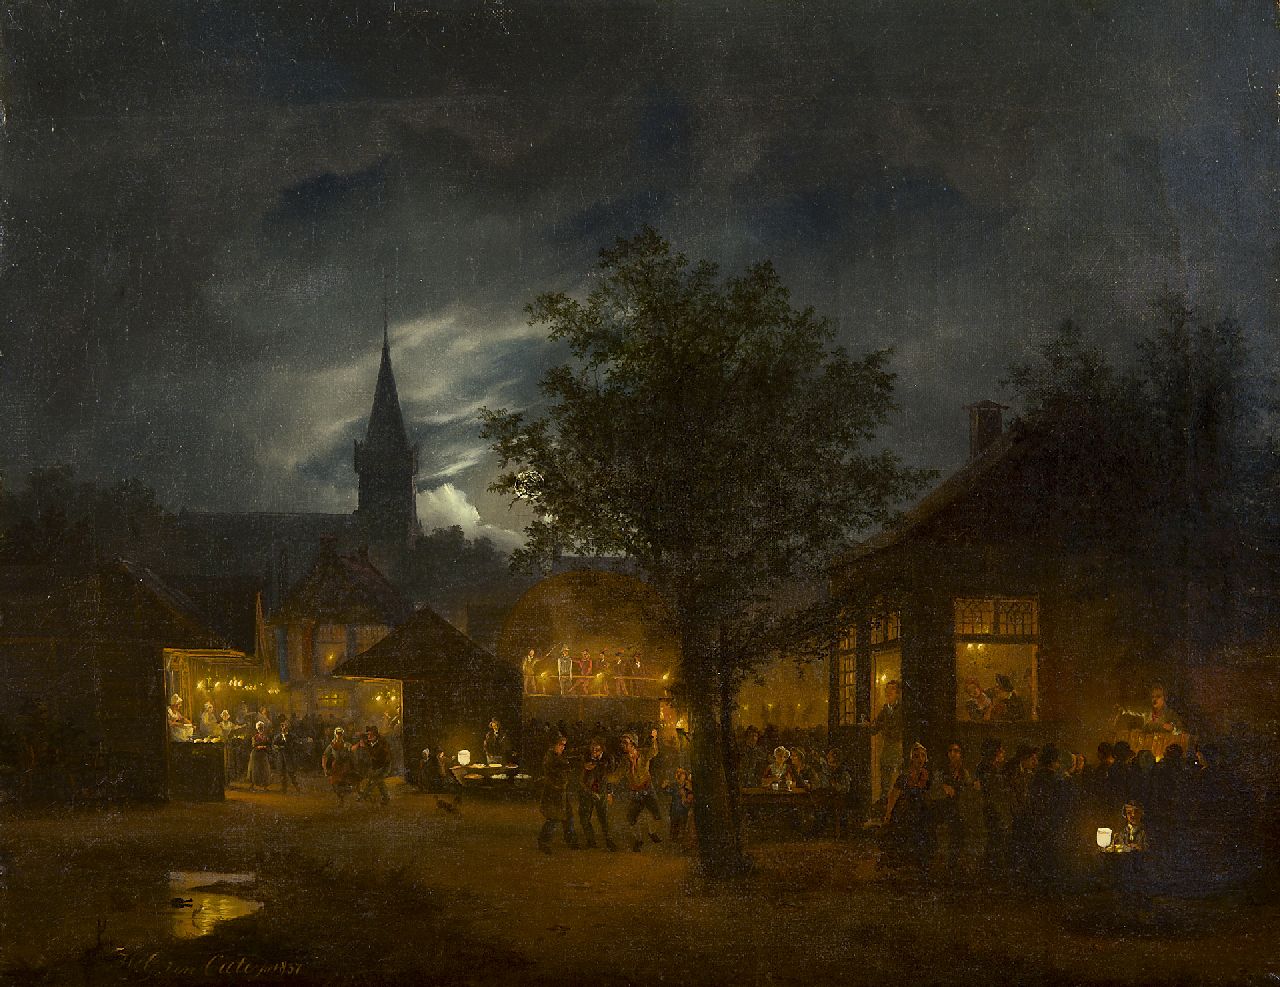 Cate H.G. ten | Hendrik Gerrit ten Cate, Merrymaking by moonlight, oil on canvas 33.4 x 43.0 cm, signed l.l. and dated 1837